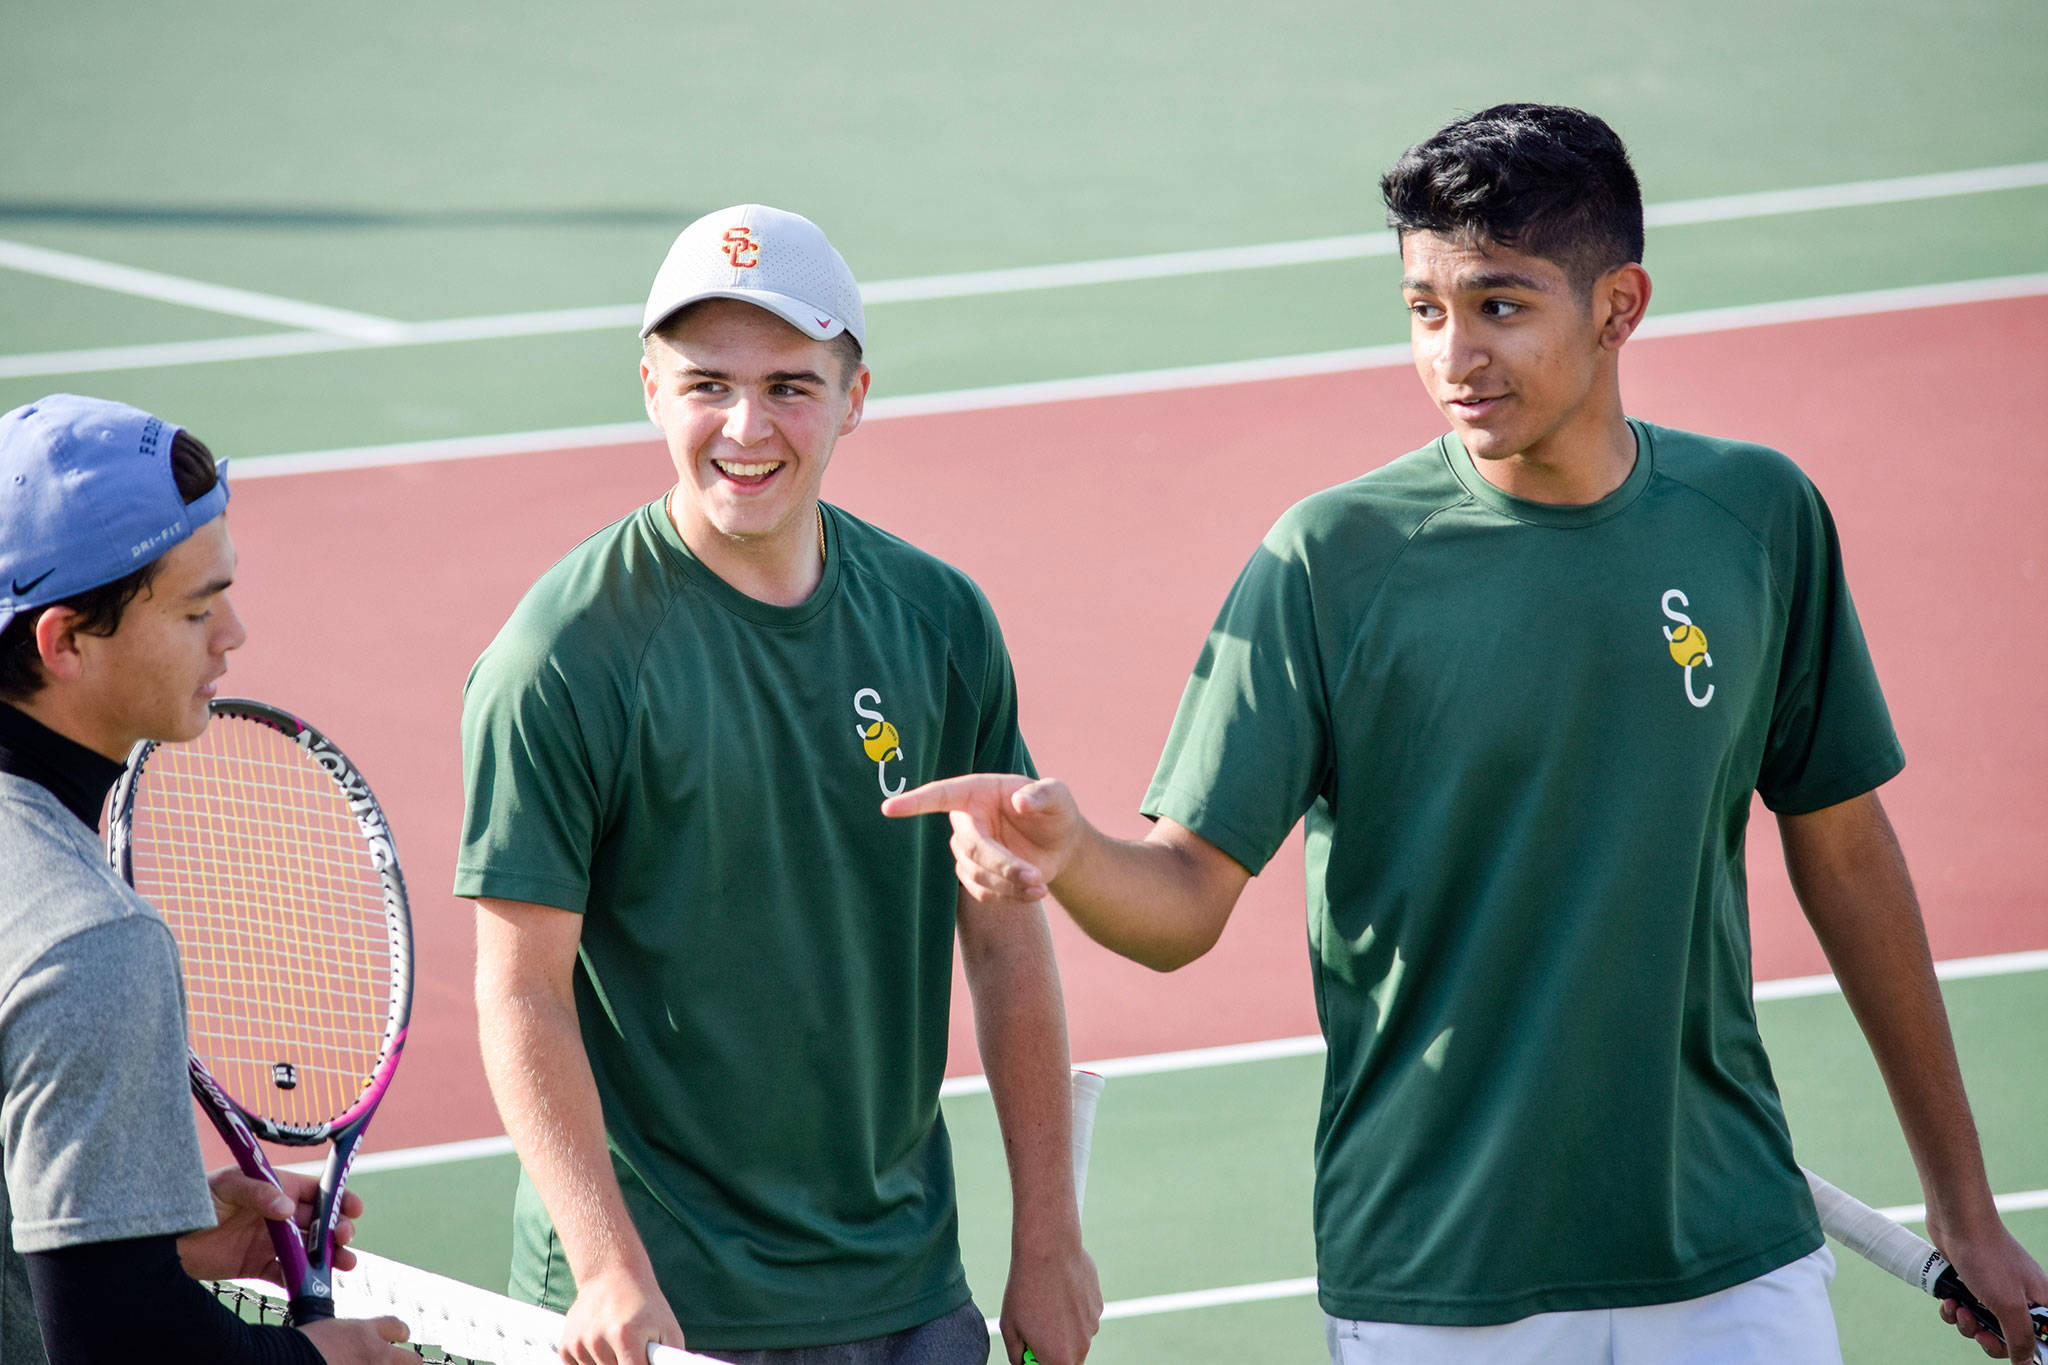 Shorecrest’s Ben Silber (middle) and Zaid Khan (right) talk to their opponents, Shintaro Wilcox and Preston Pierce, from Stanwood after winning the 3A Northwest District Tournament doubles final on Wednesday, Oct. 30 at Arlington High School. (Katie Webber / The Herald)